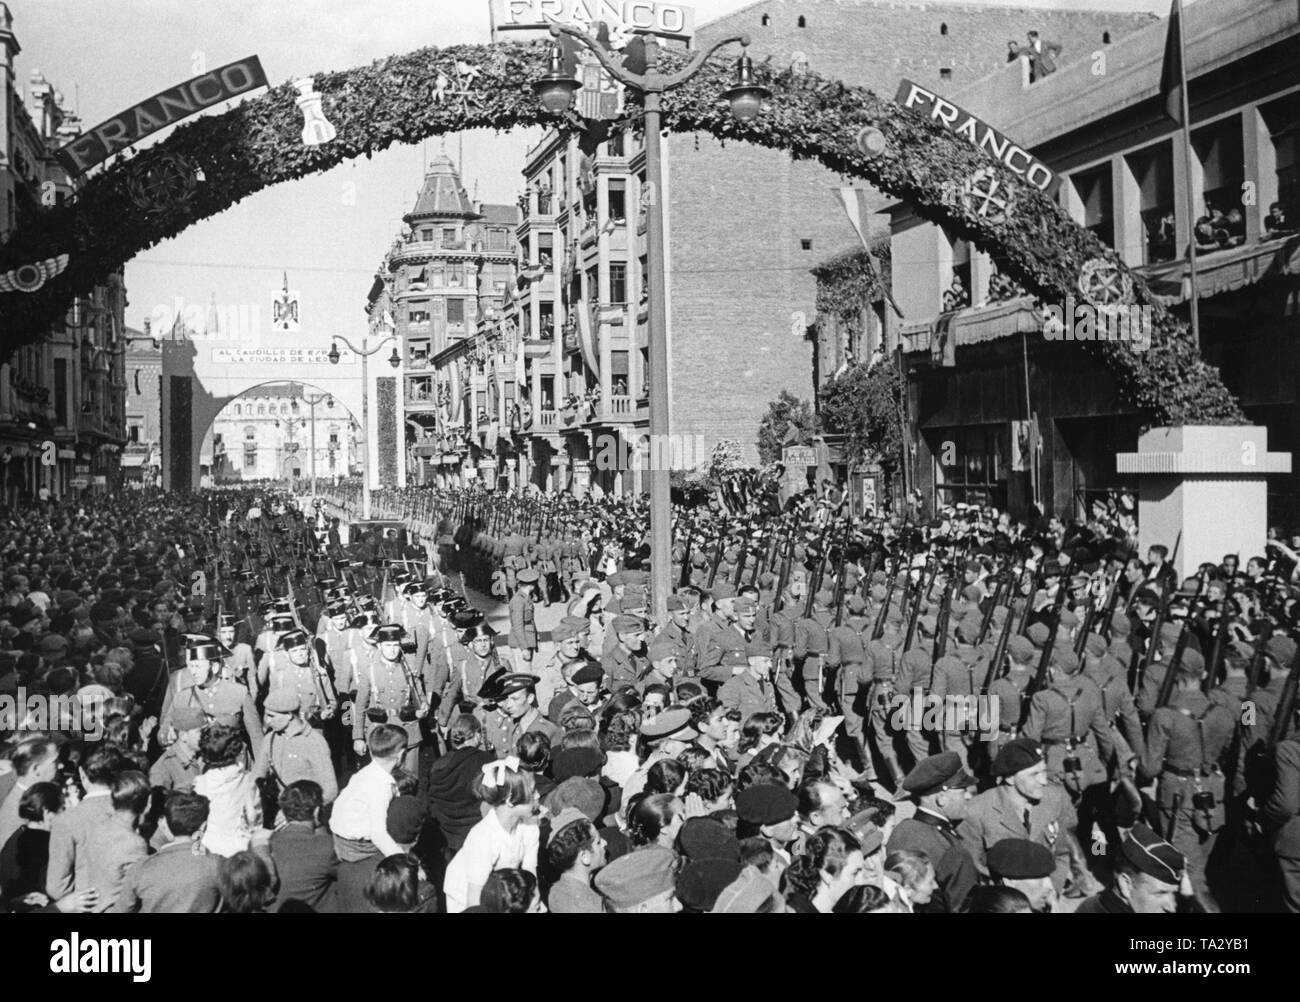 Photo of a victory parade of Spanish national troops and the German Condor Legion in honor of General Francisco Franco in the festively decorated streets of Ciudad de Leon, Castile and Leon on May 22, 1939. The soldiers are marching in two directions: on the left a unit of the Spanish Guardia Civil is parading, on the right, the Condor Legion. In the background, the triumphal arch in honor of the Condor Legion. Stock Photo